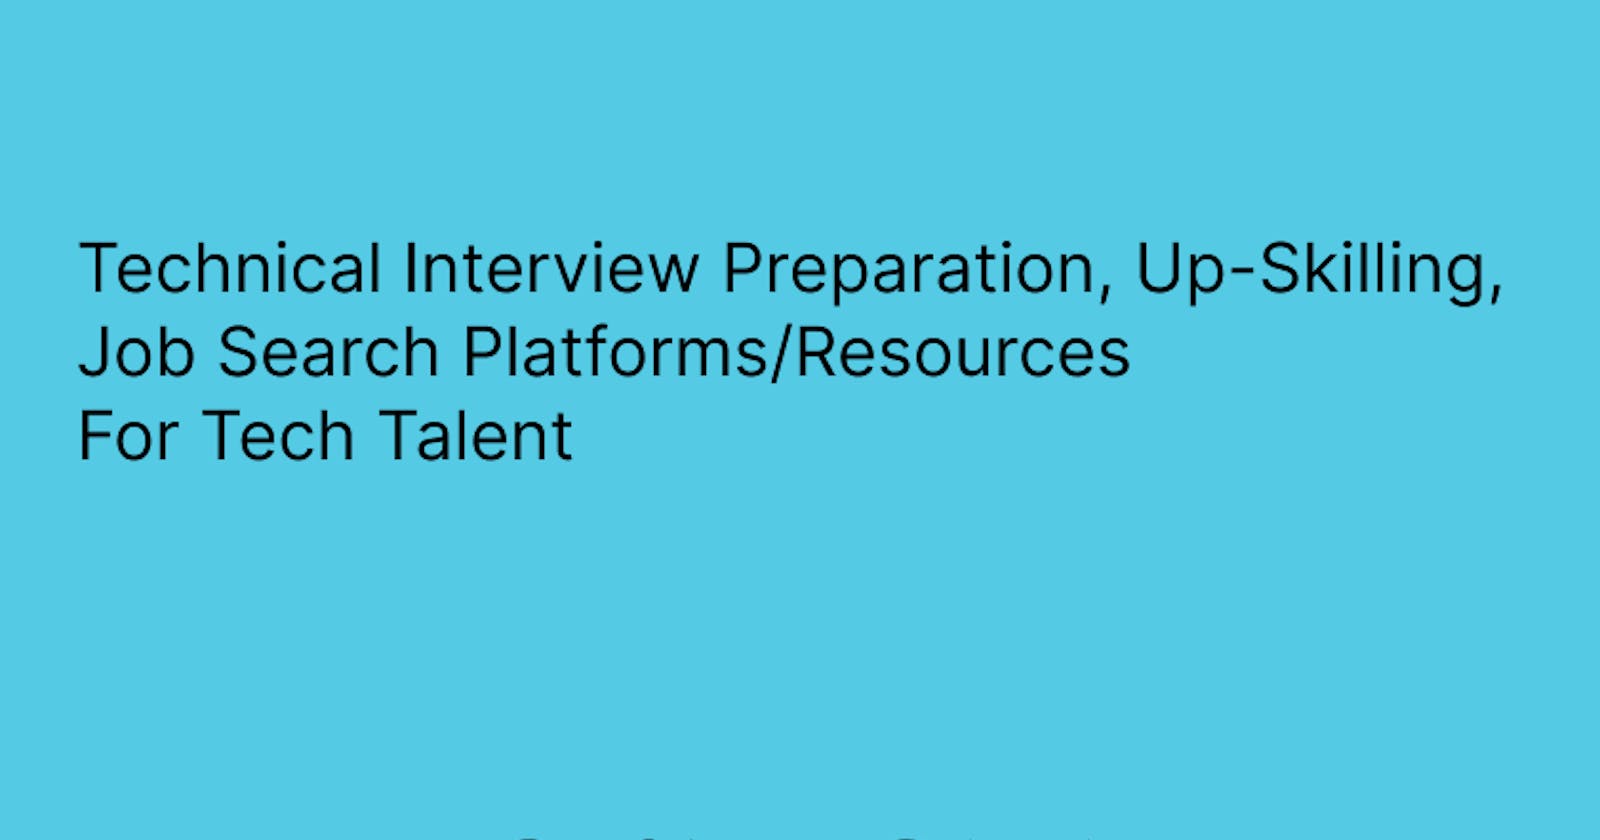 Technical Interview Preparation, Upskilling, and Job Search Platforms & Resources For Tech Talent